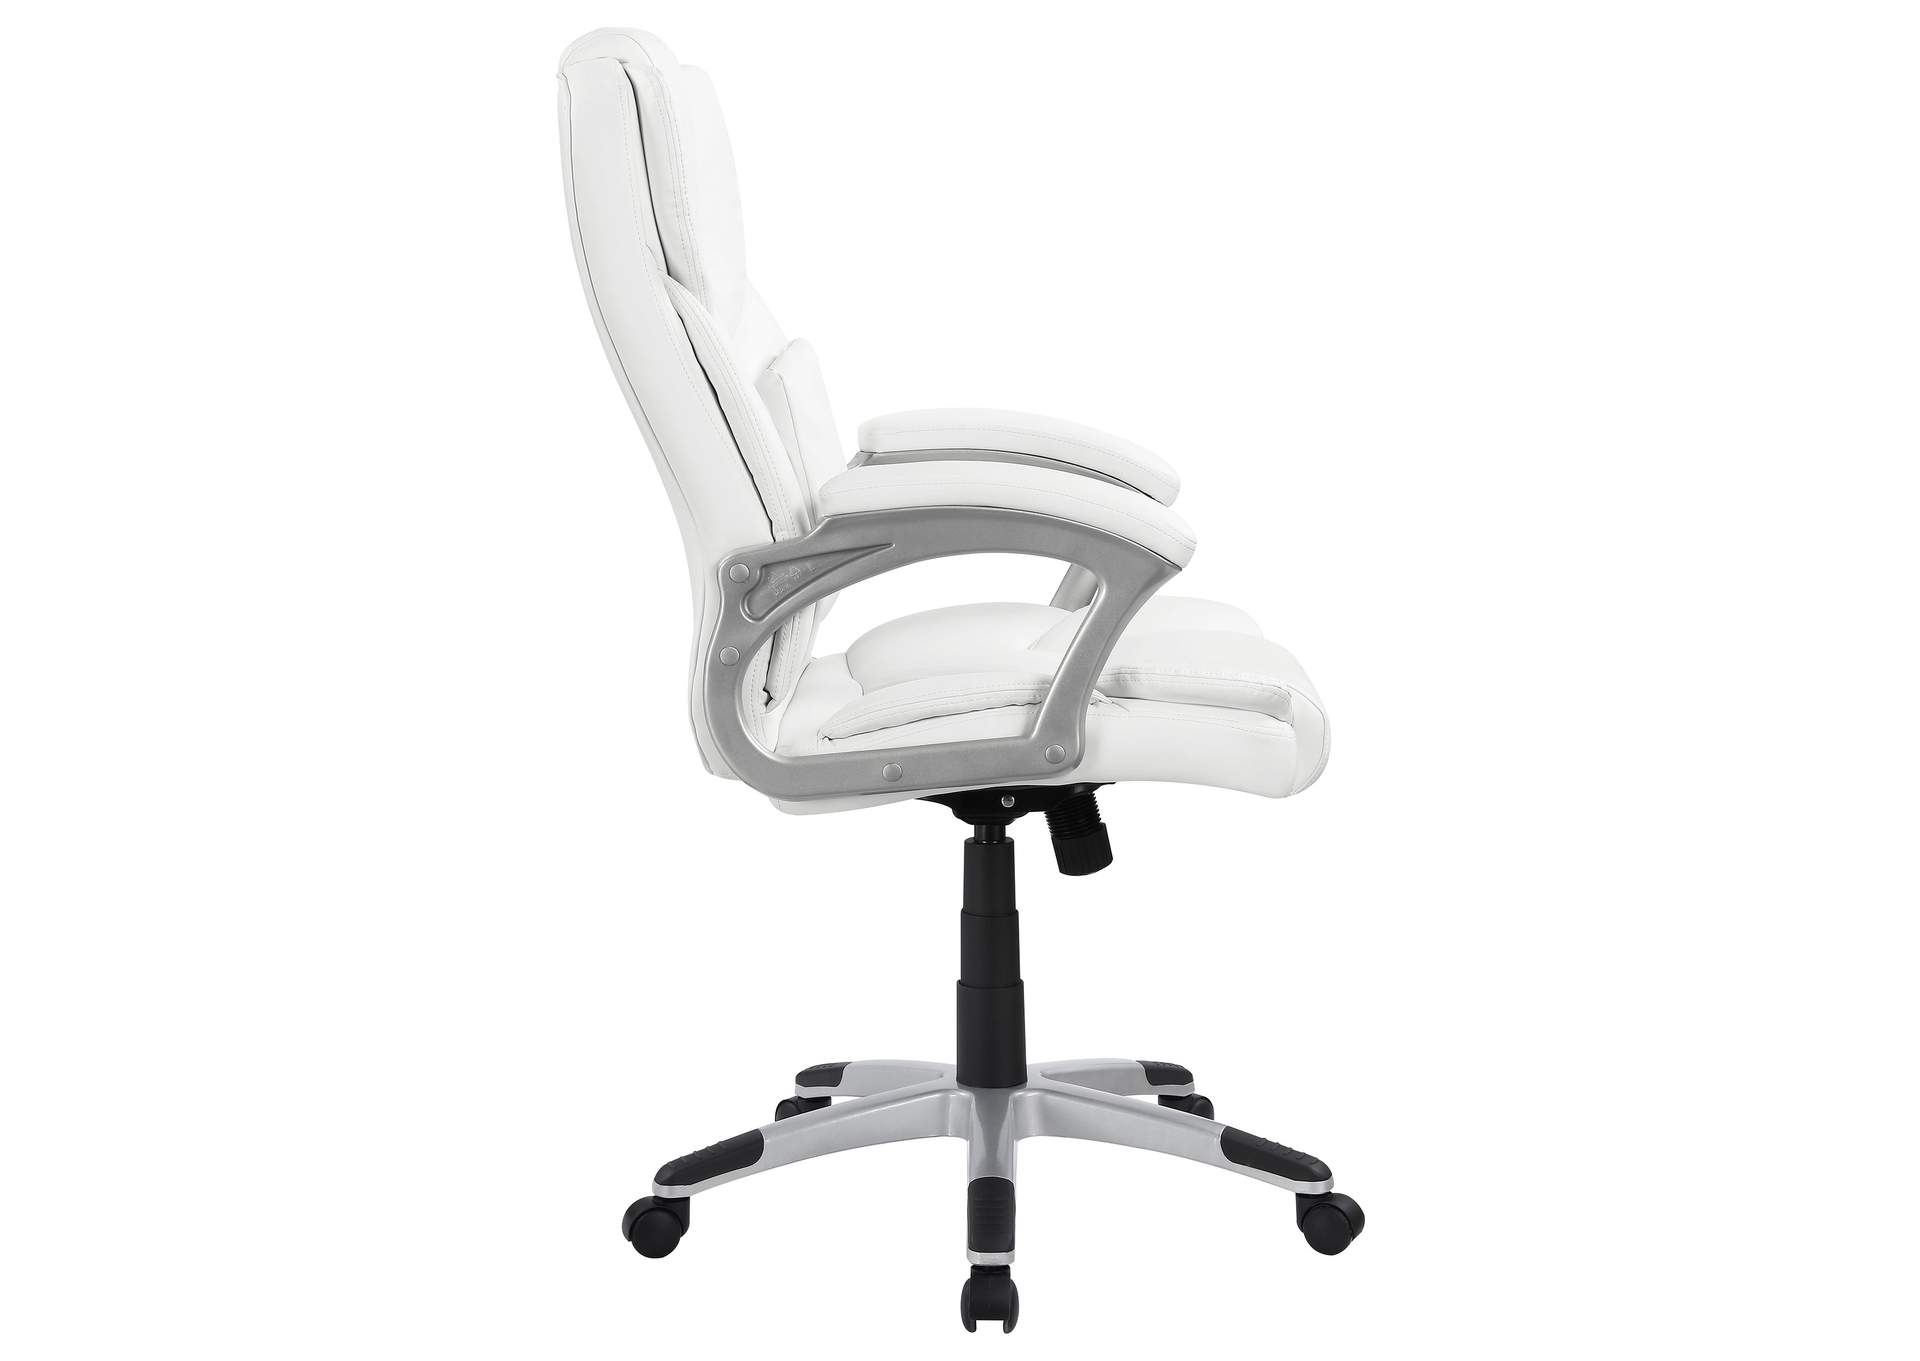 Kaffir Adjustable Height Office Chair White and Silver,Coaster Furniture